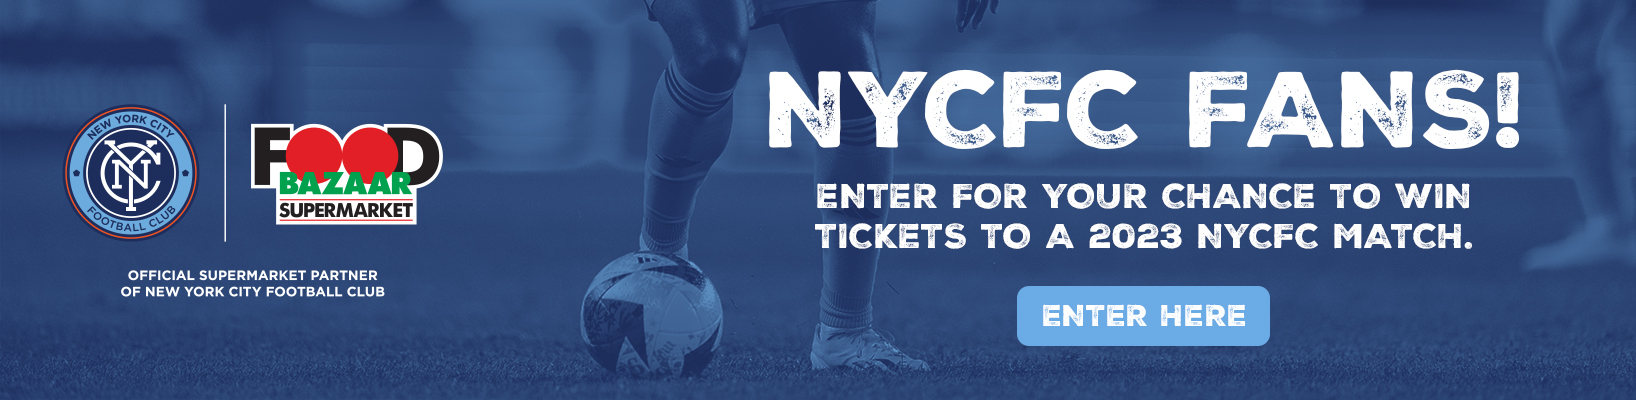 NYCFC FANS! - Enter for your chance to win tickets to a 2023 NYCFC match.